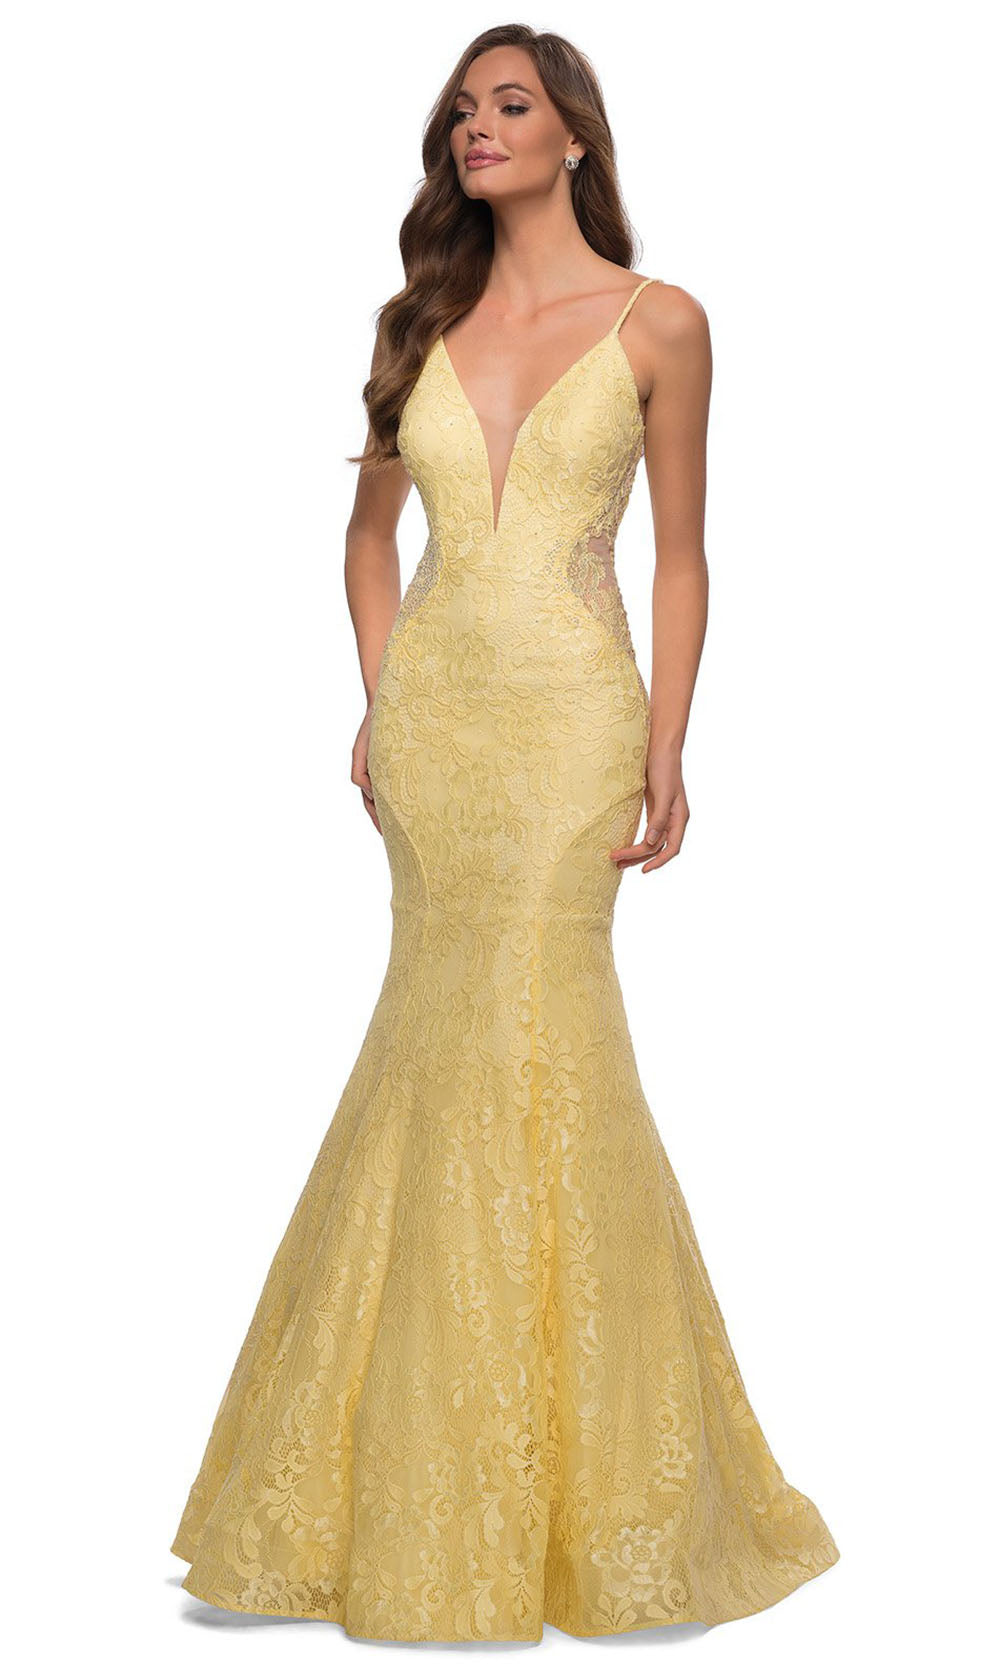 La Femme - 28355 Sparkly Lace Illusion Bodice Mermaid Gown In Yellow